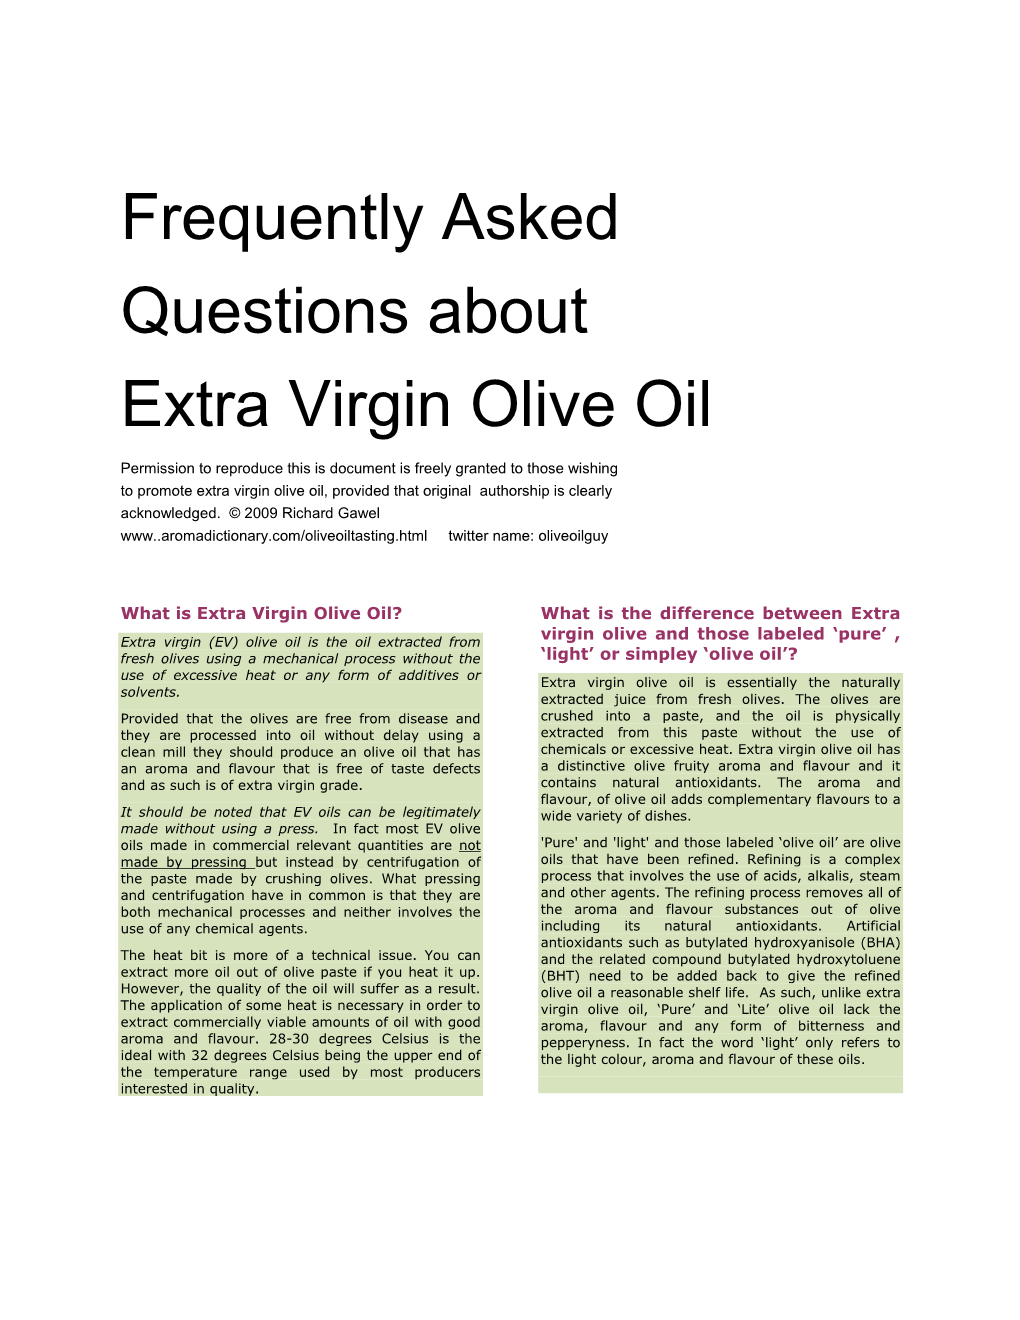 Frequently Asked Questions About Extra Virgin Olive Oil